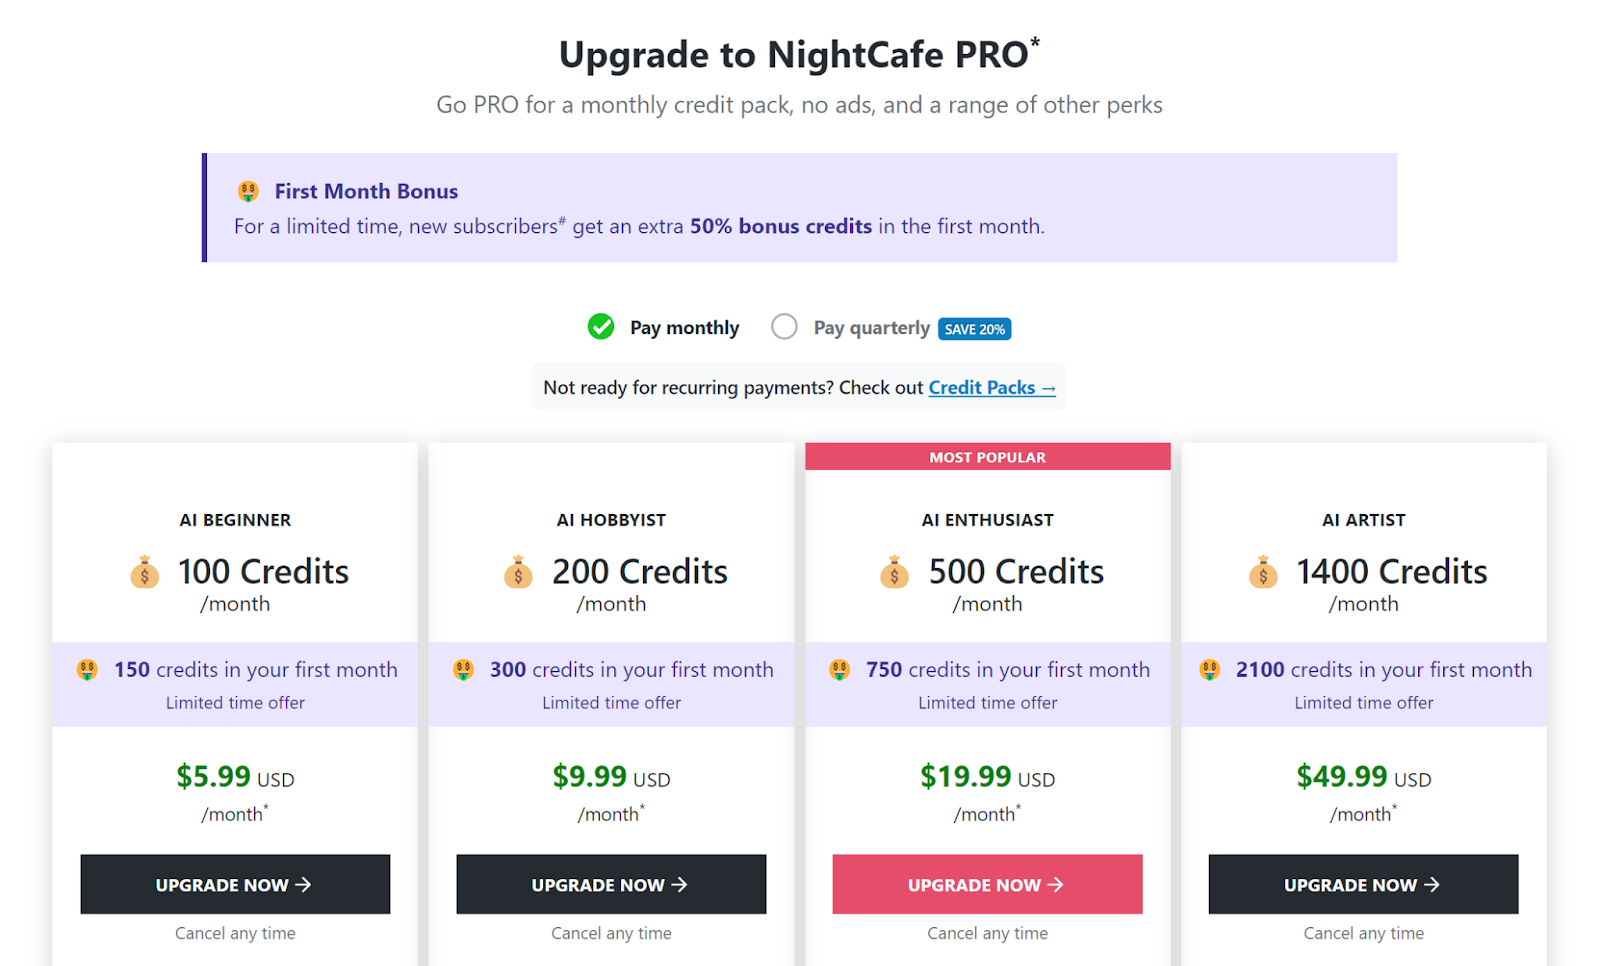 Monthly subscription plans available on NightCafe.